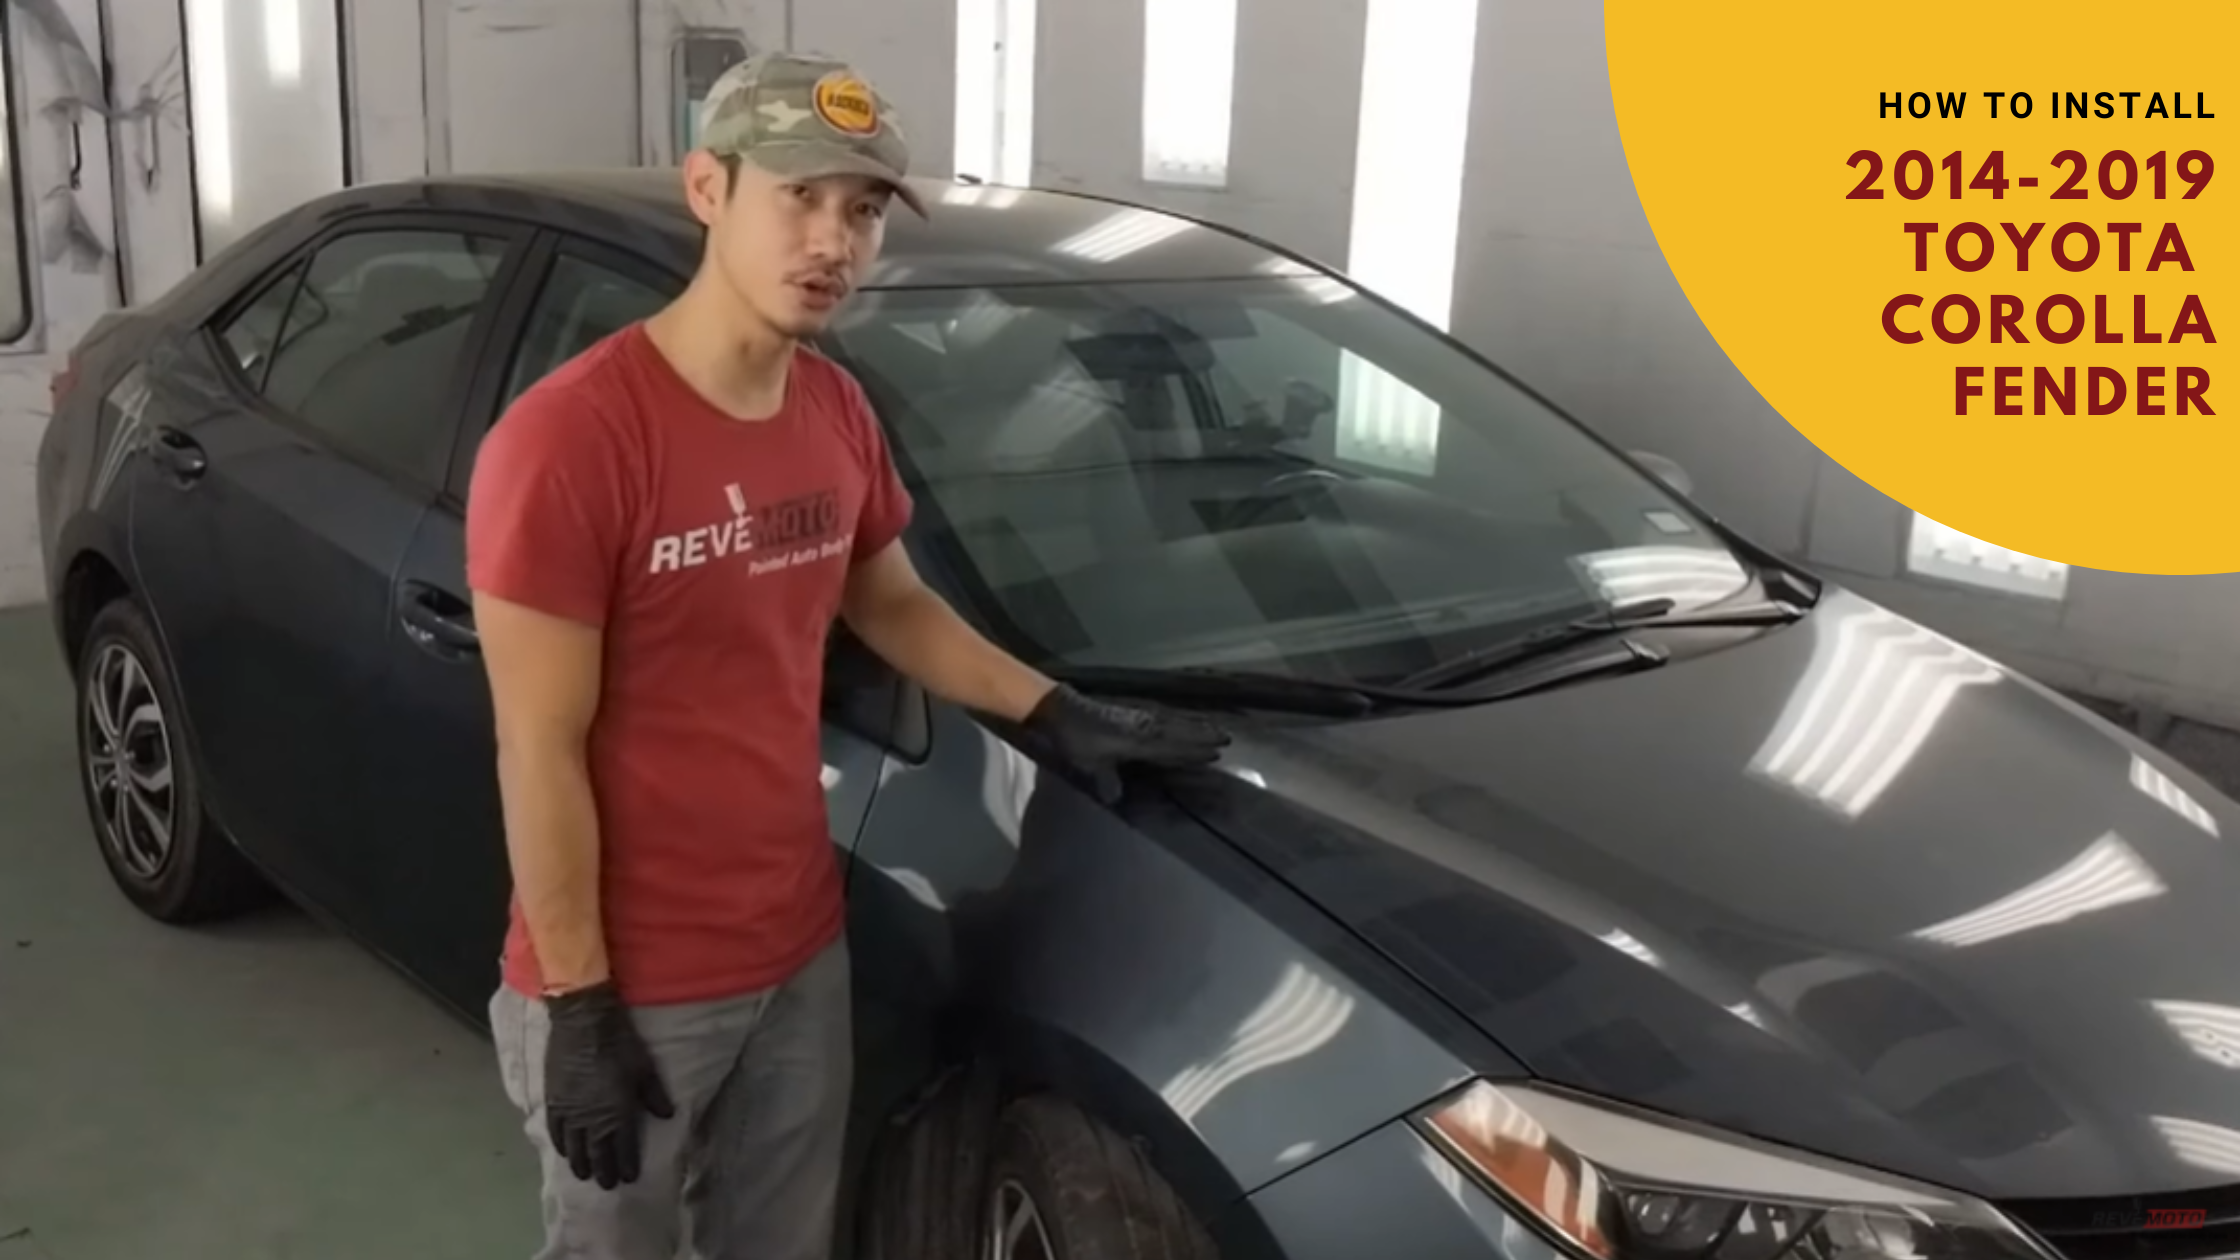 How to install a 2014-2019 Toyota Corolla Fender